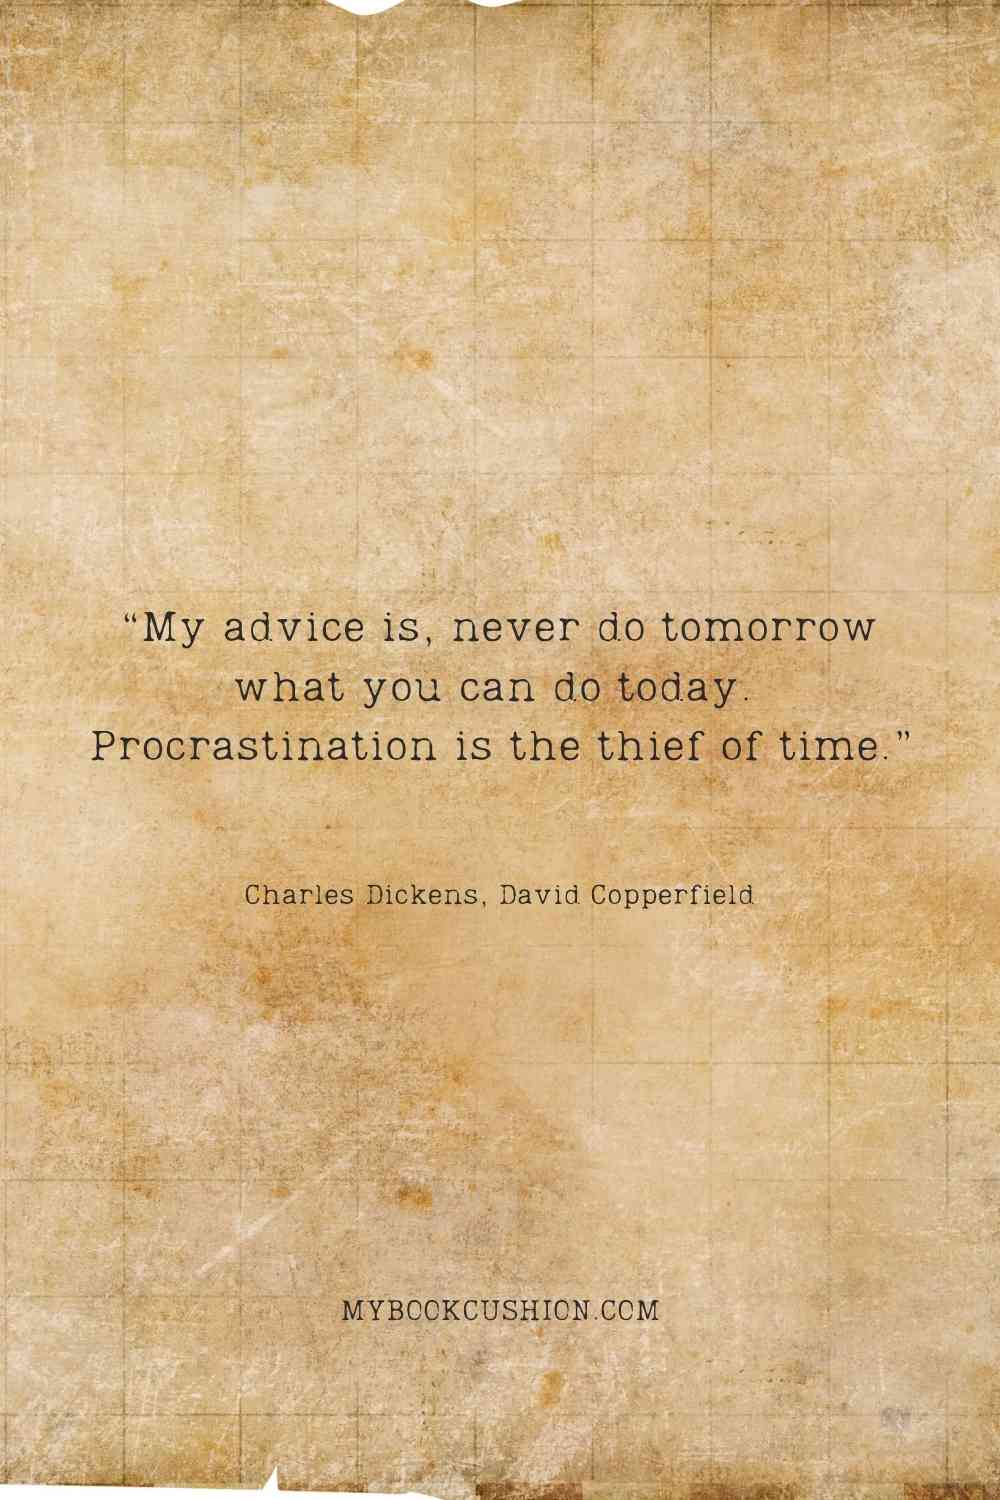 “My advice is, never do tomorrow what you can do today. Procrastination is the thief of time.” - Charles Dickens, David Copperfield